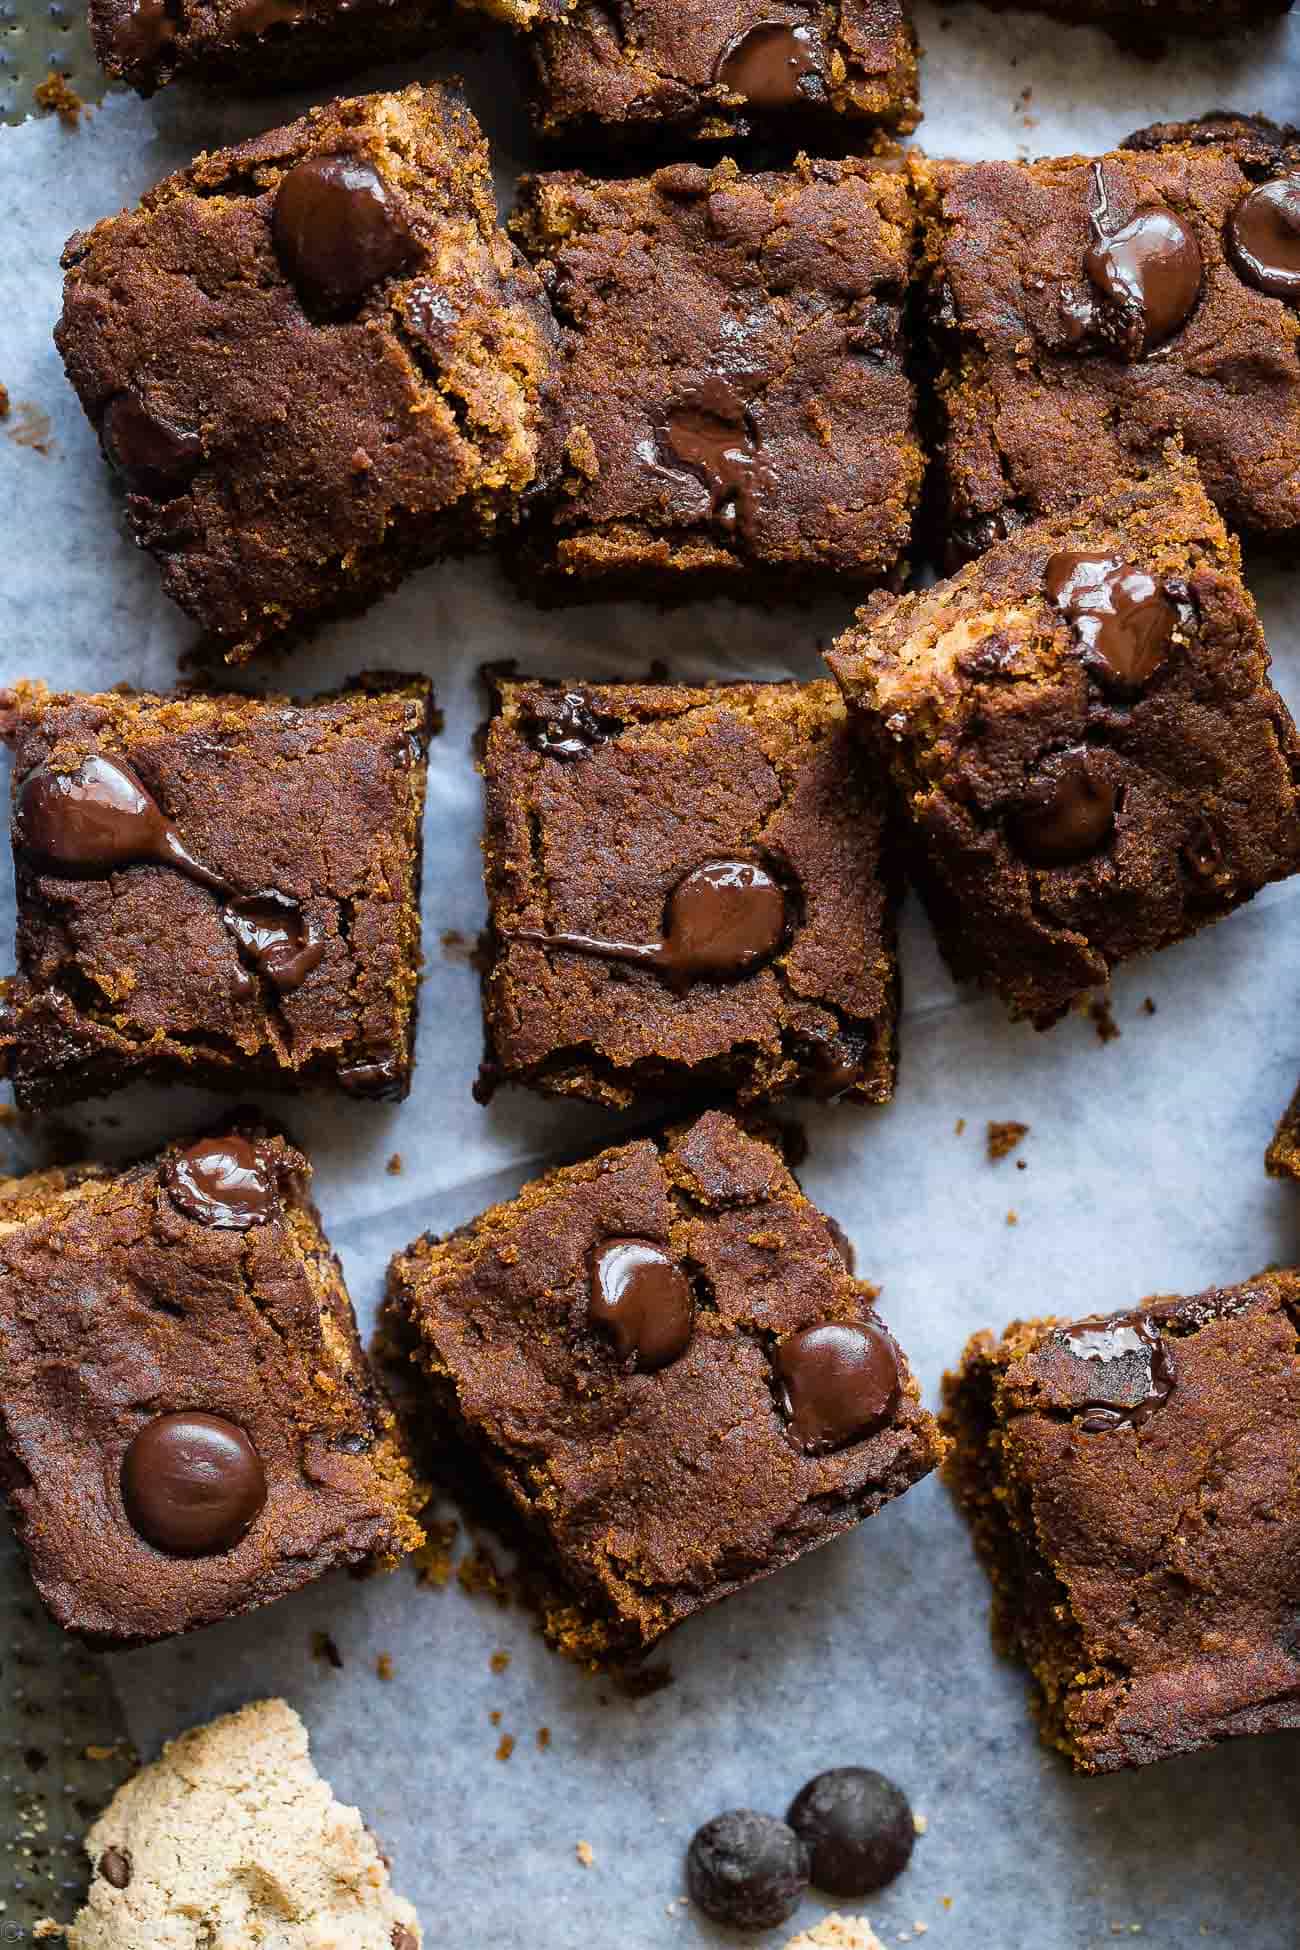 Cookie Stuffed Chewy Pumpkin Blondies - Cookies are baked right inside these healthier pumpkin brookies! They're so dense and chewy you'll never know they're gluten and dairy free! | Foodfaithfitness.com | @FoodFaithFit